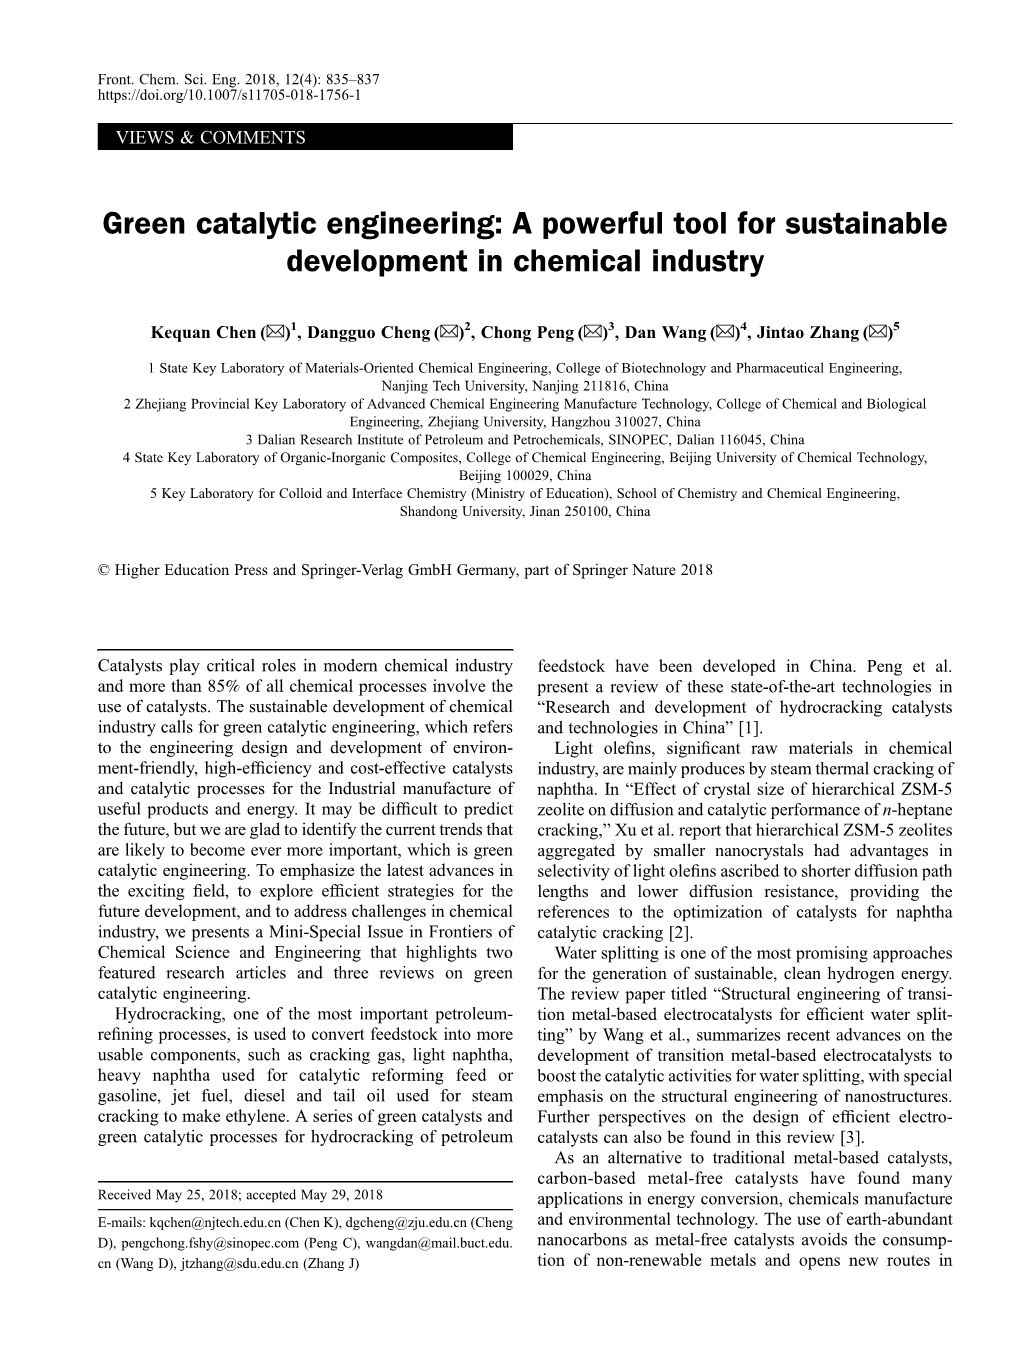 Green Catalytic Engineering: a Powerful Tool for Sustainable Development in Chemical Industry